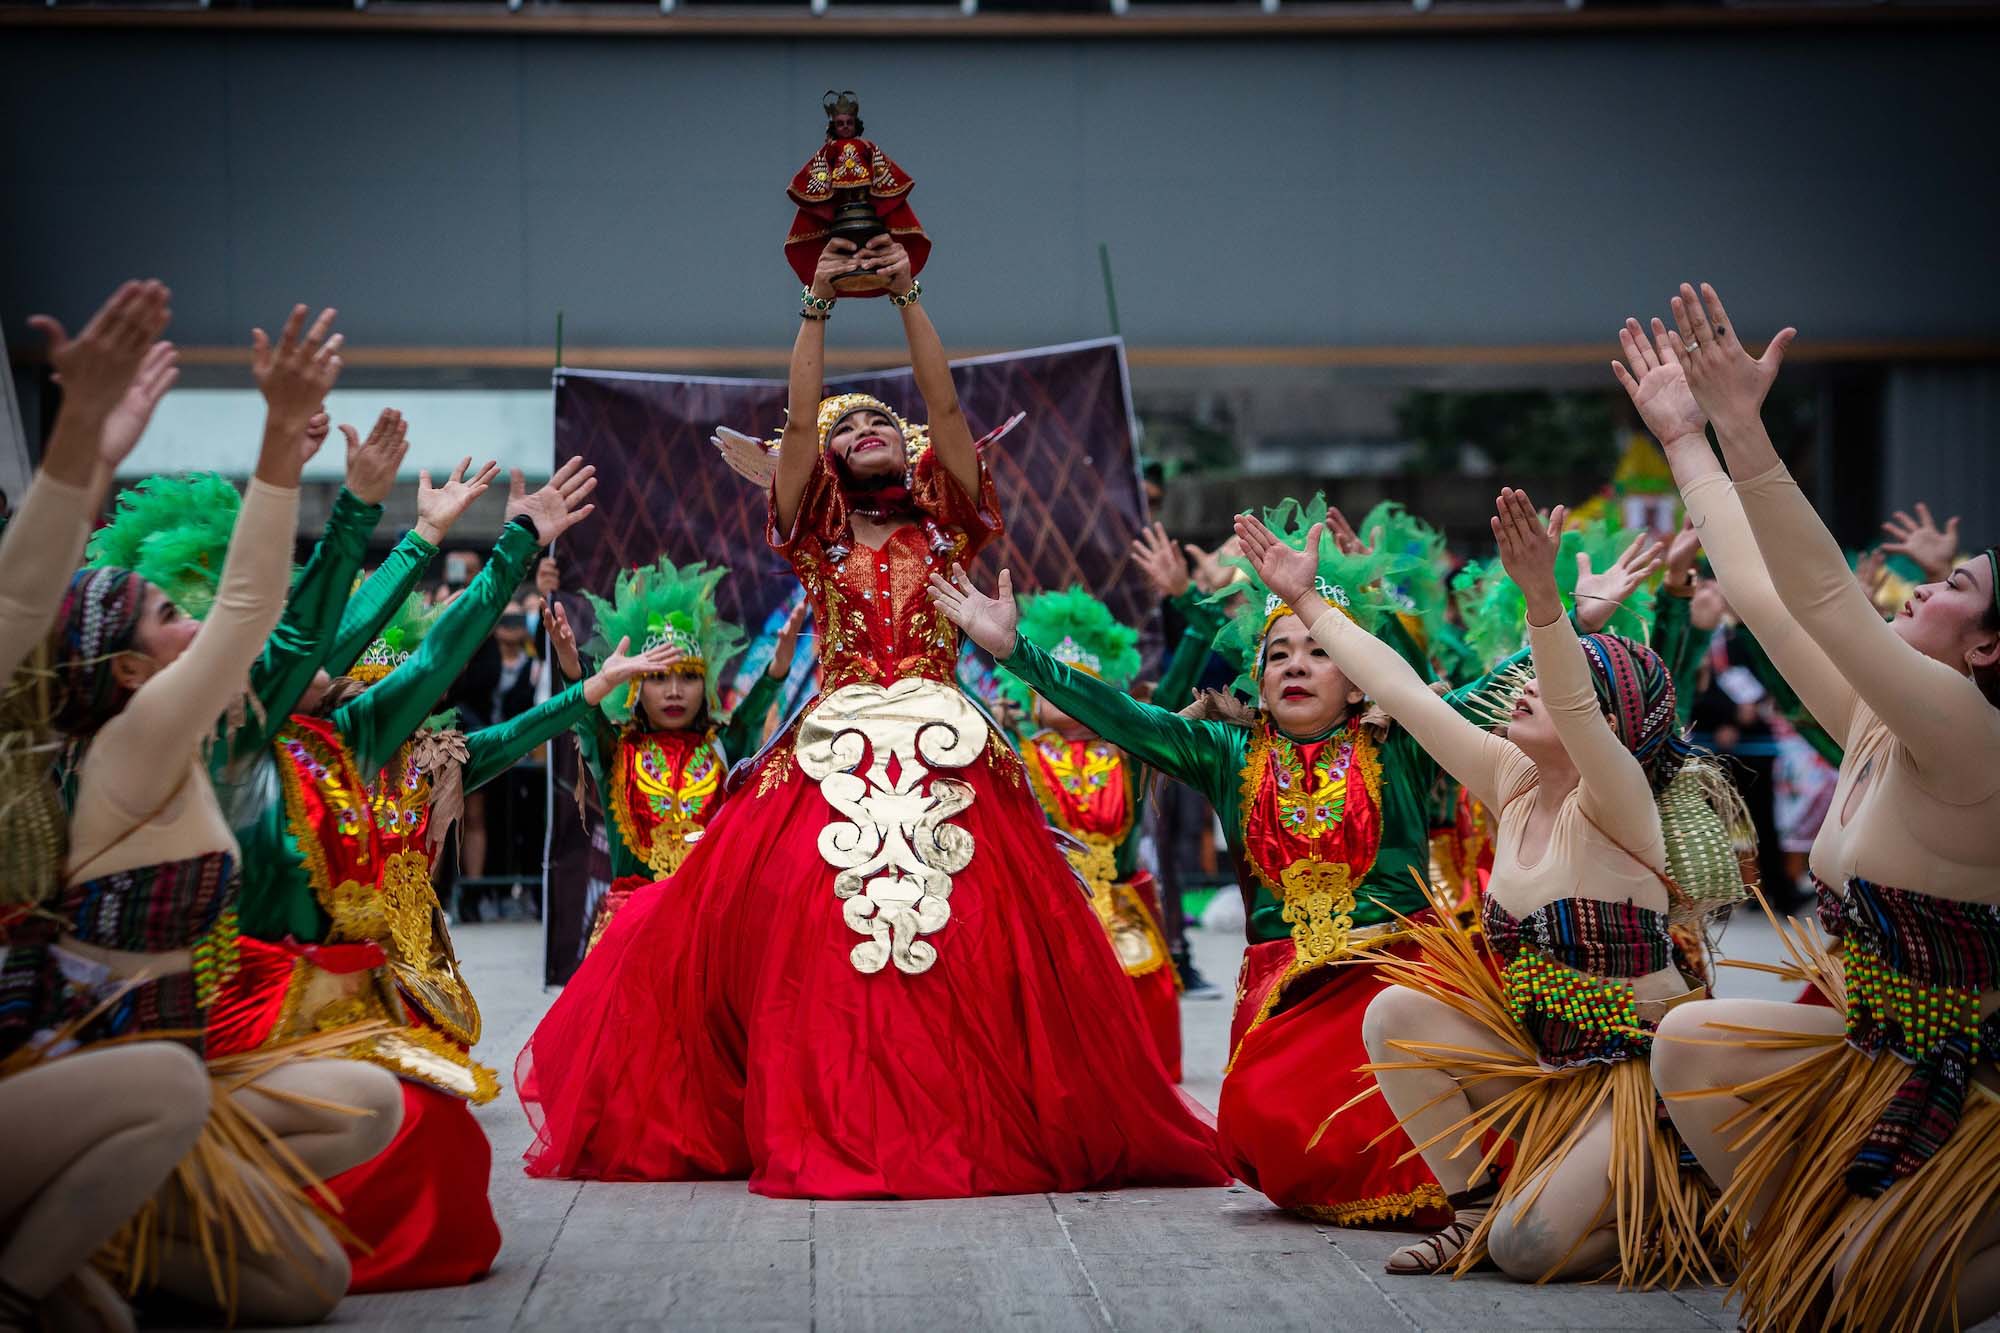 The National Philippine Guardians Incorporated dance troupe concludes its performance at Sinulog